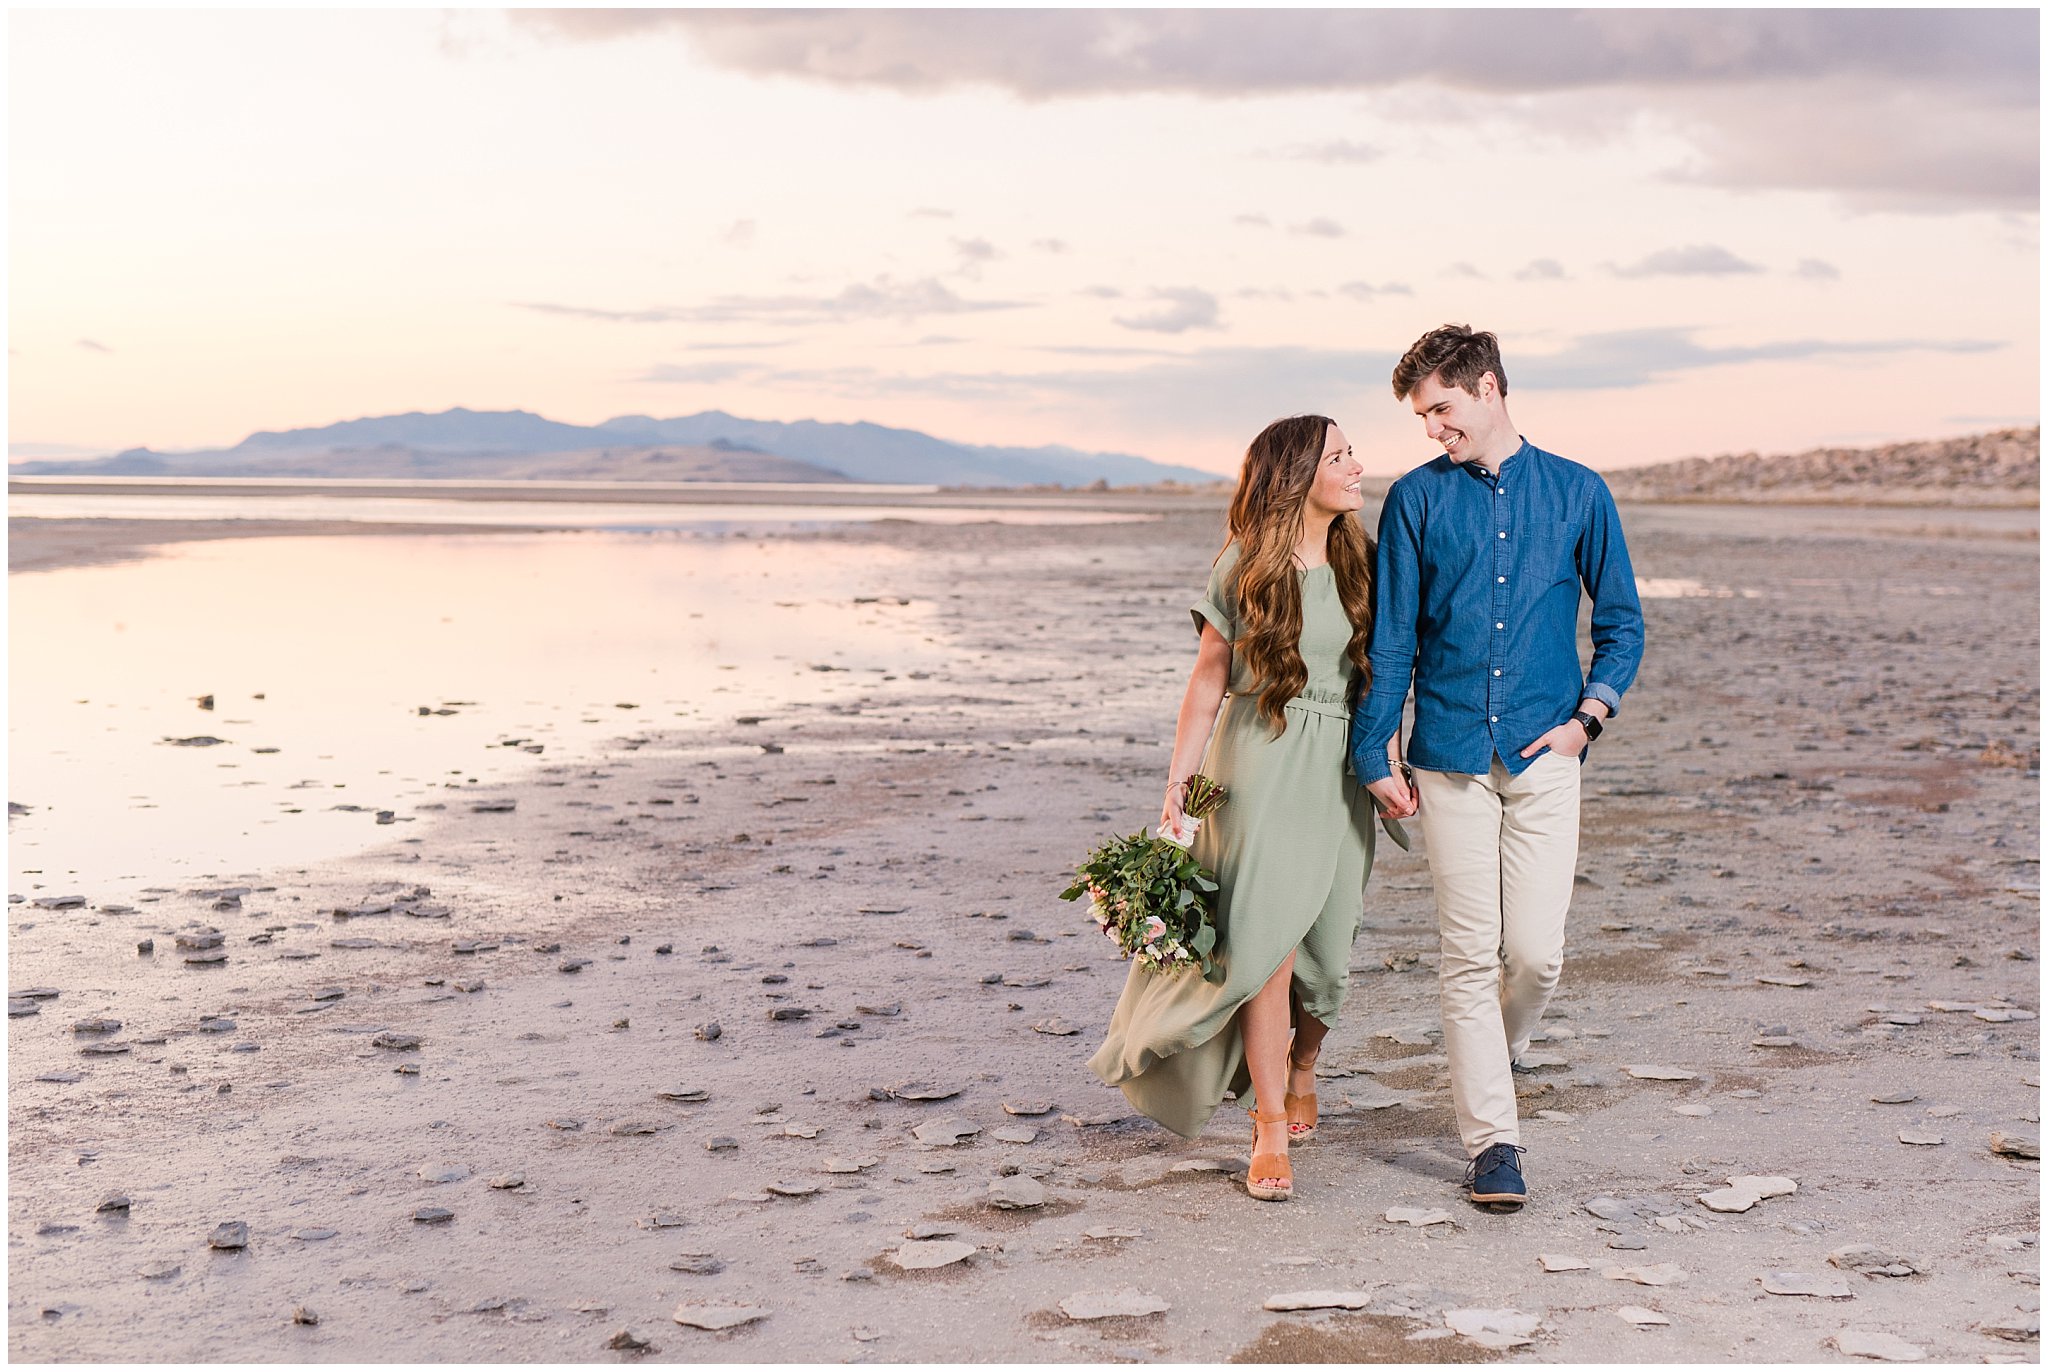 Couple walks along the beach at sunset during engagement photos in Utah | Top Utah Wedding and Couples Photos 2019 | Jessie and Dallin Photography